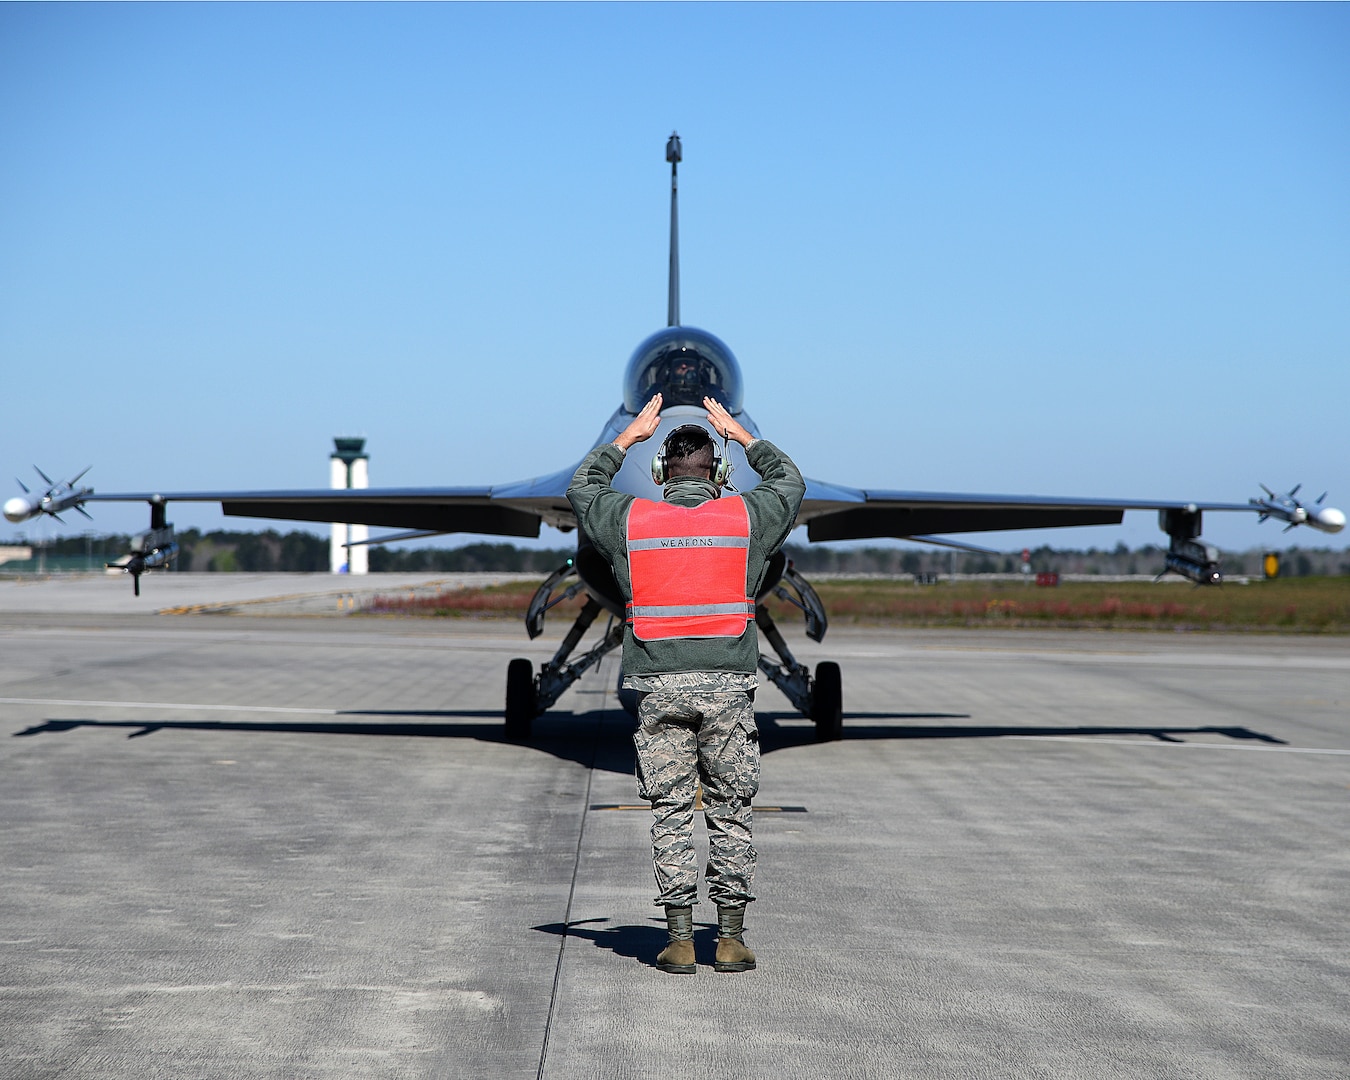 U.S. Air Force Tech. Sgt. Jeffrey J. Raine, an aircraft armament weapons loader with the New Jersey Air National Guard's 177th Fighter Wing, signals to an F-16C Fighting Falcon before launch at the Air Dominance Center in Savannah, Georgia, March 9, 2018. The 177th FW participated in an air-to-air training exercise to sharpen air combat capabilities and accomplish multiple training upgrades.